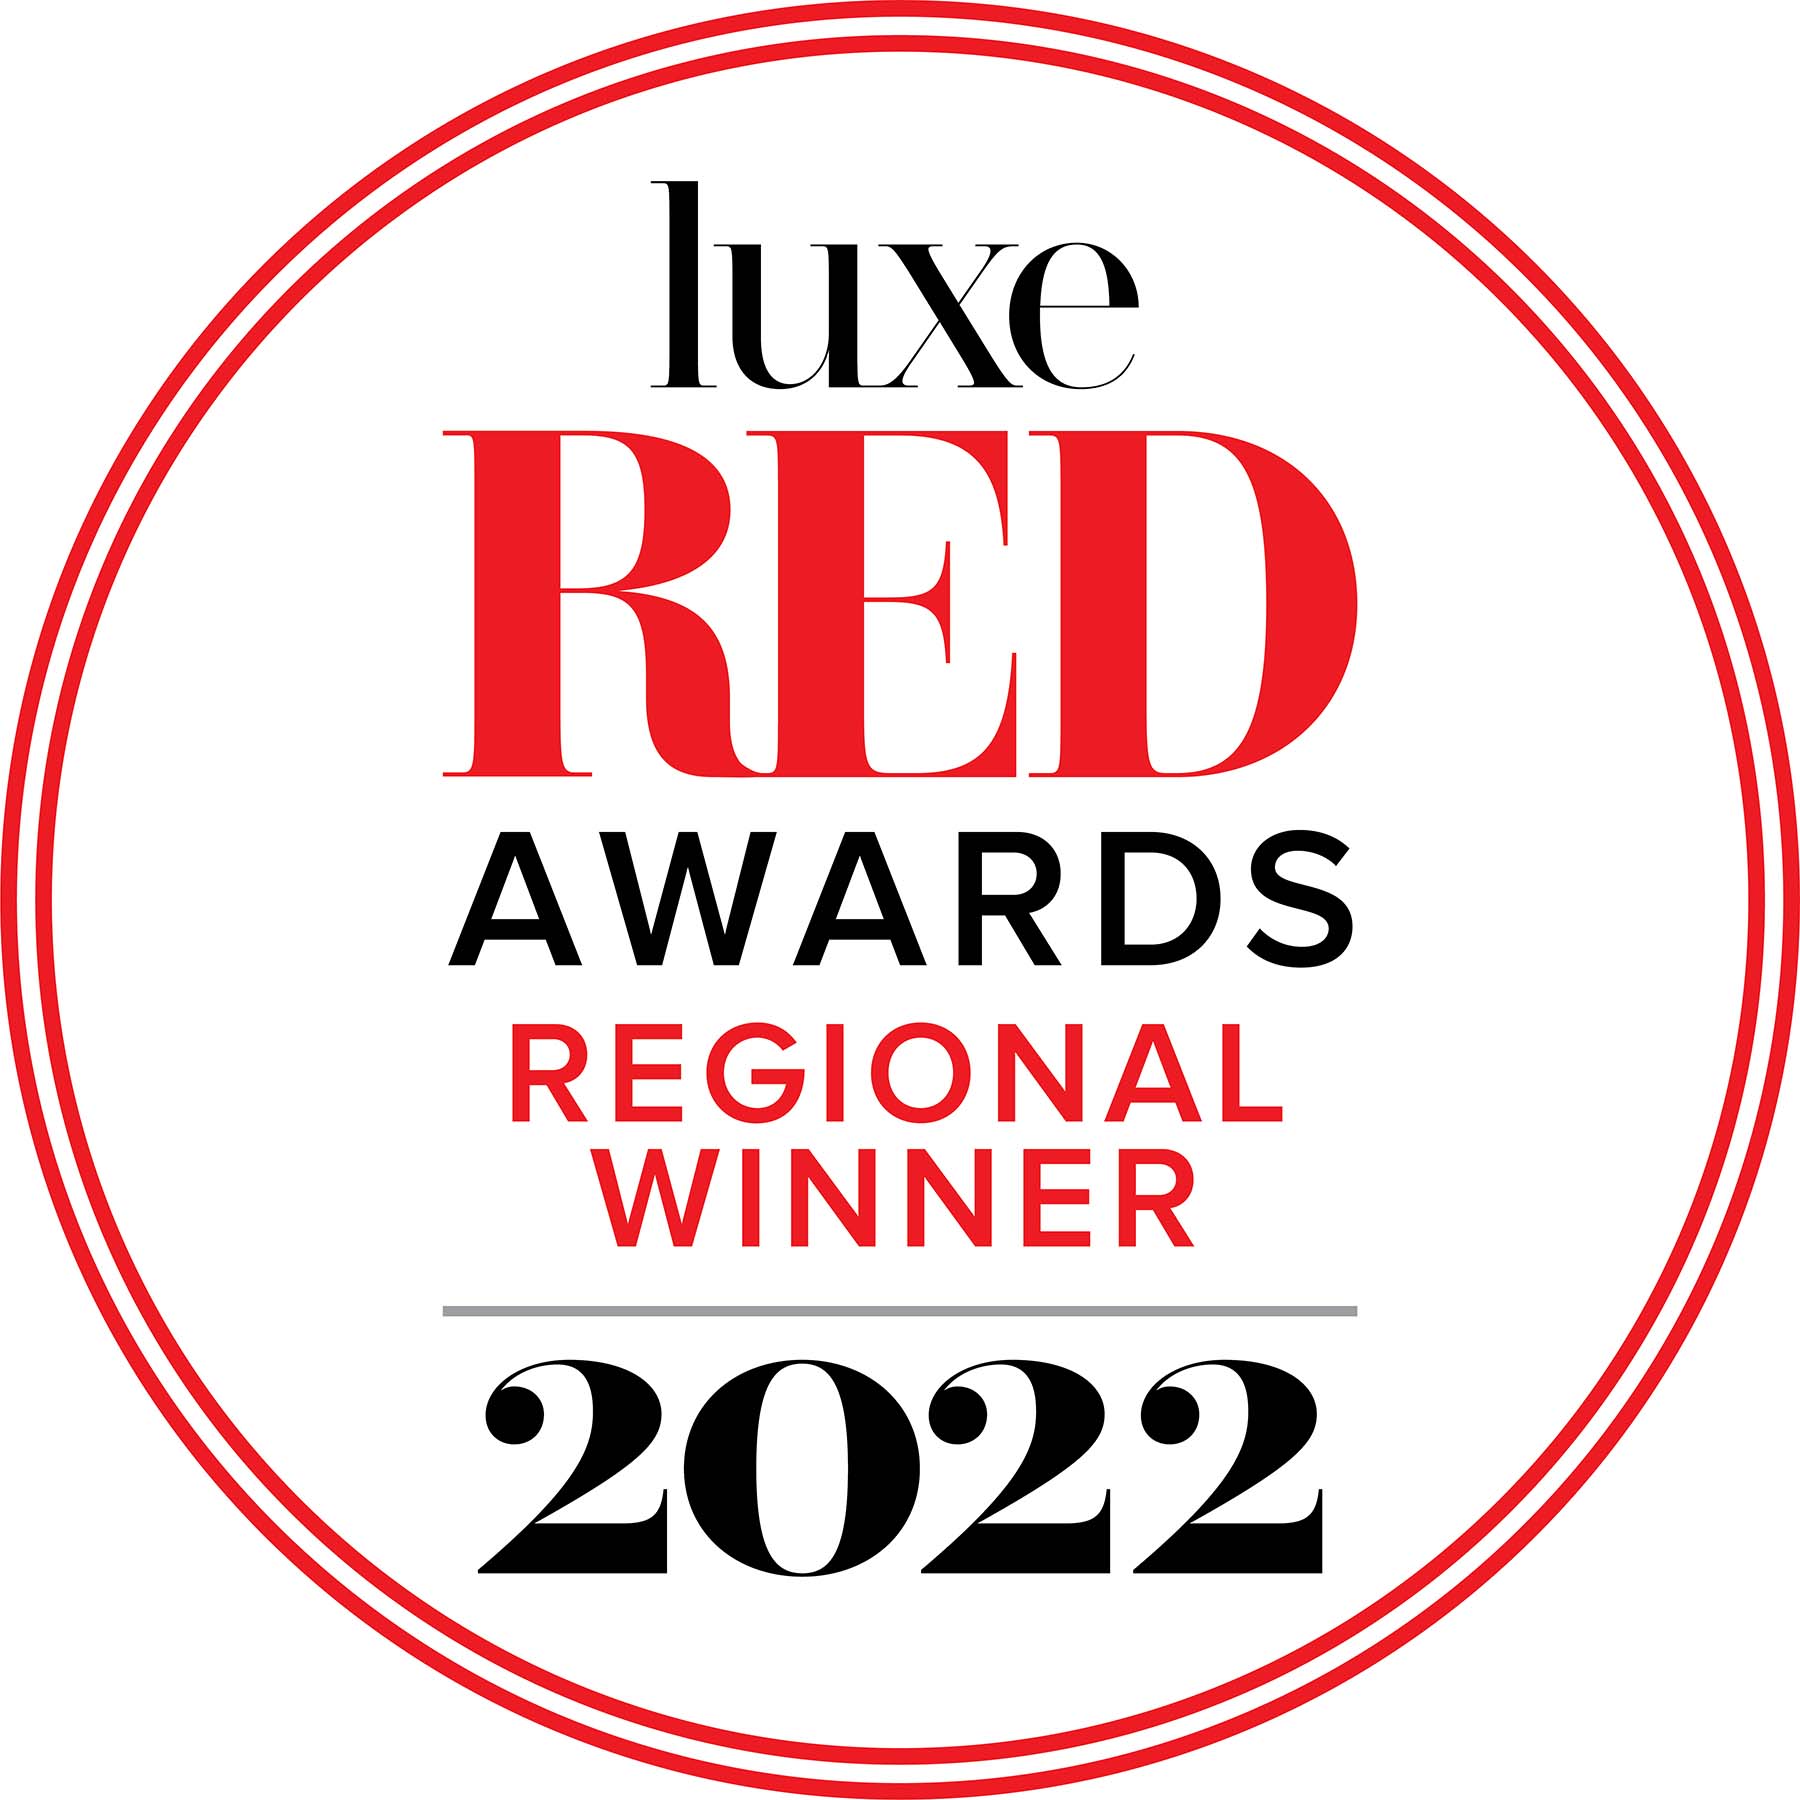 Luxe Red Awards badge